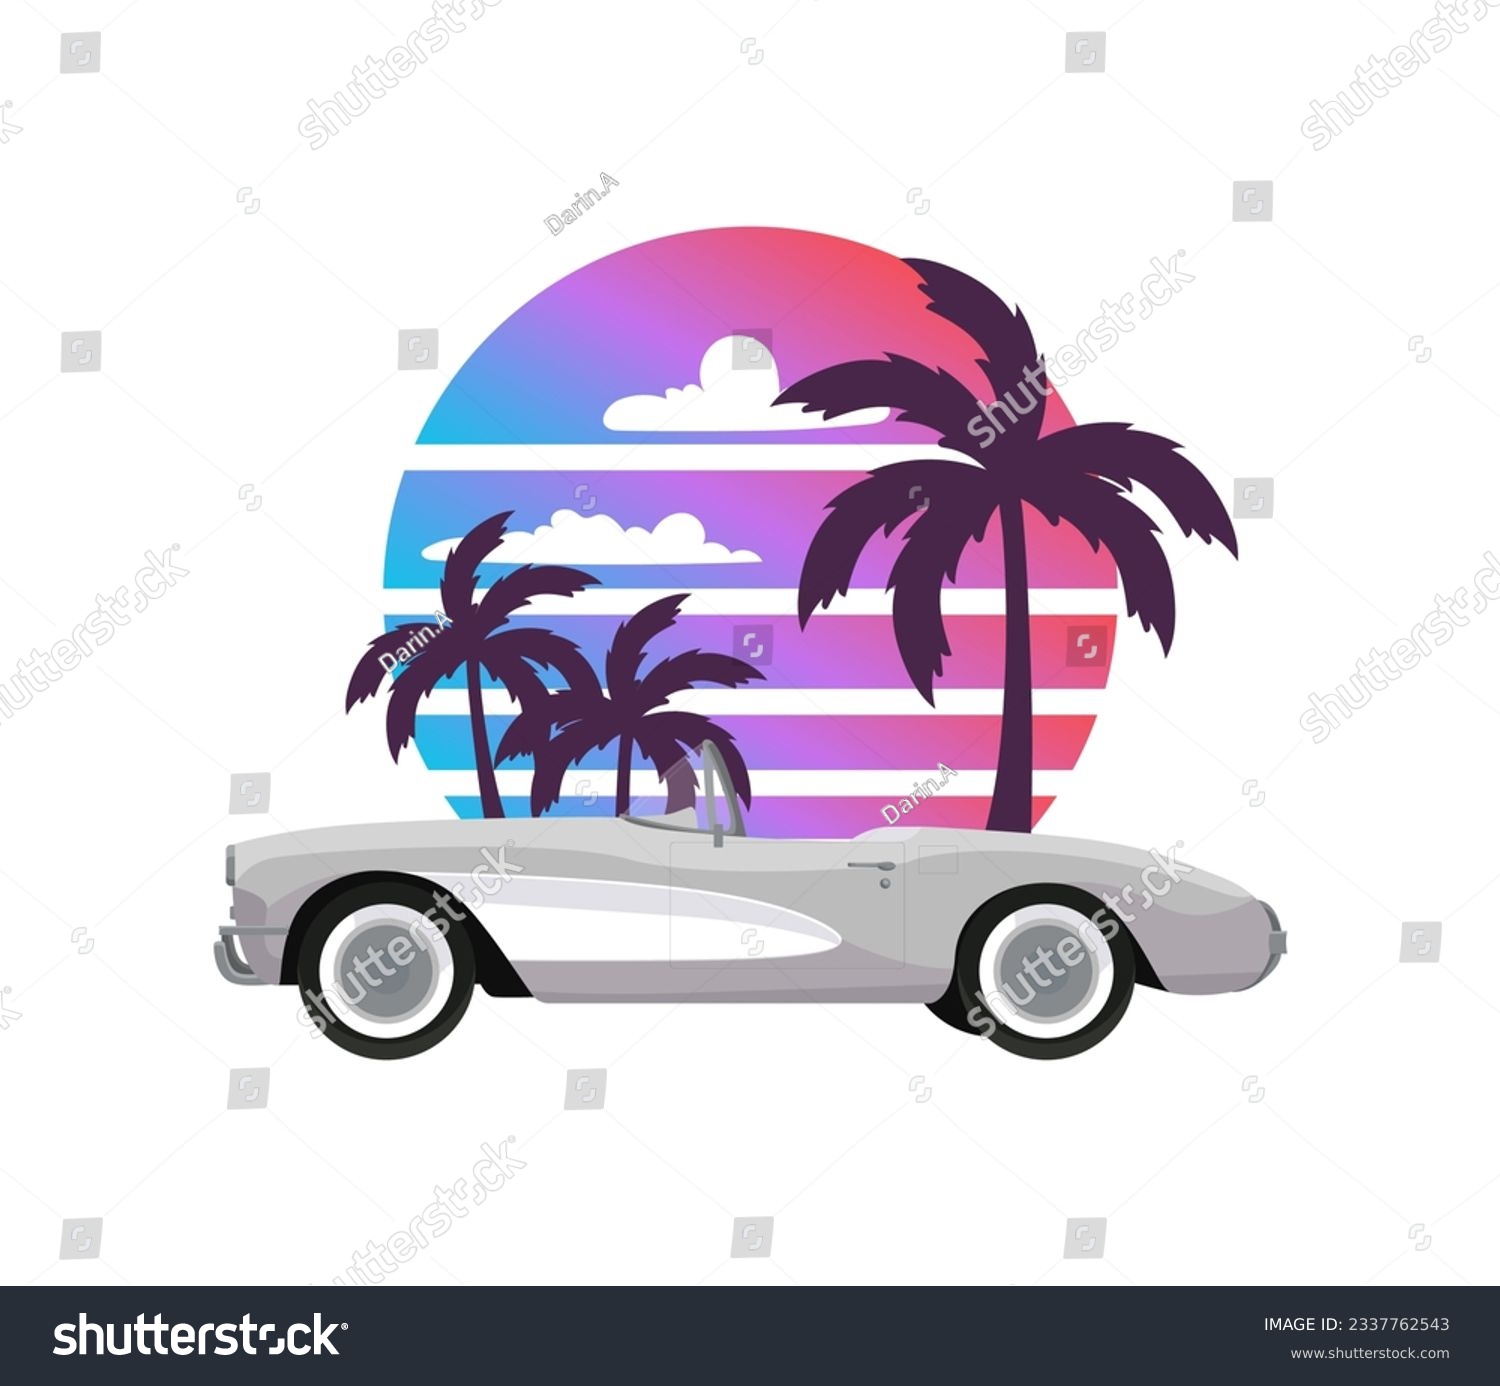 SVG of Classic corvette car on summer sunset with palm trees background in retro vintage style. Design print illustration, sticker, poster. Vector svg